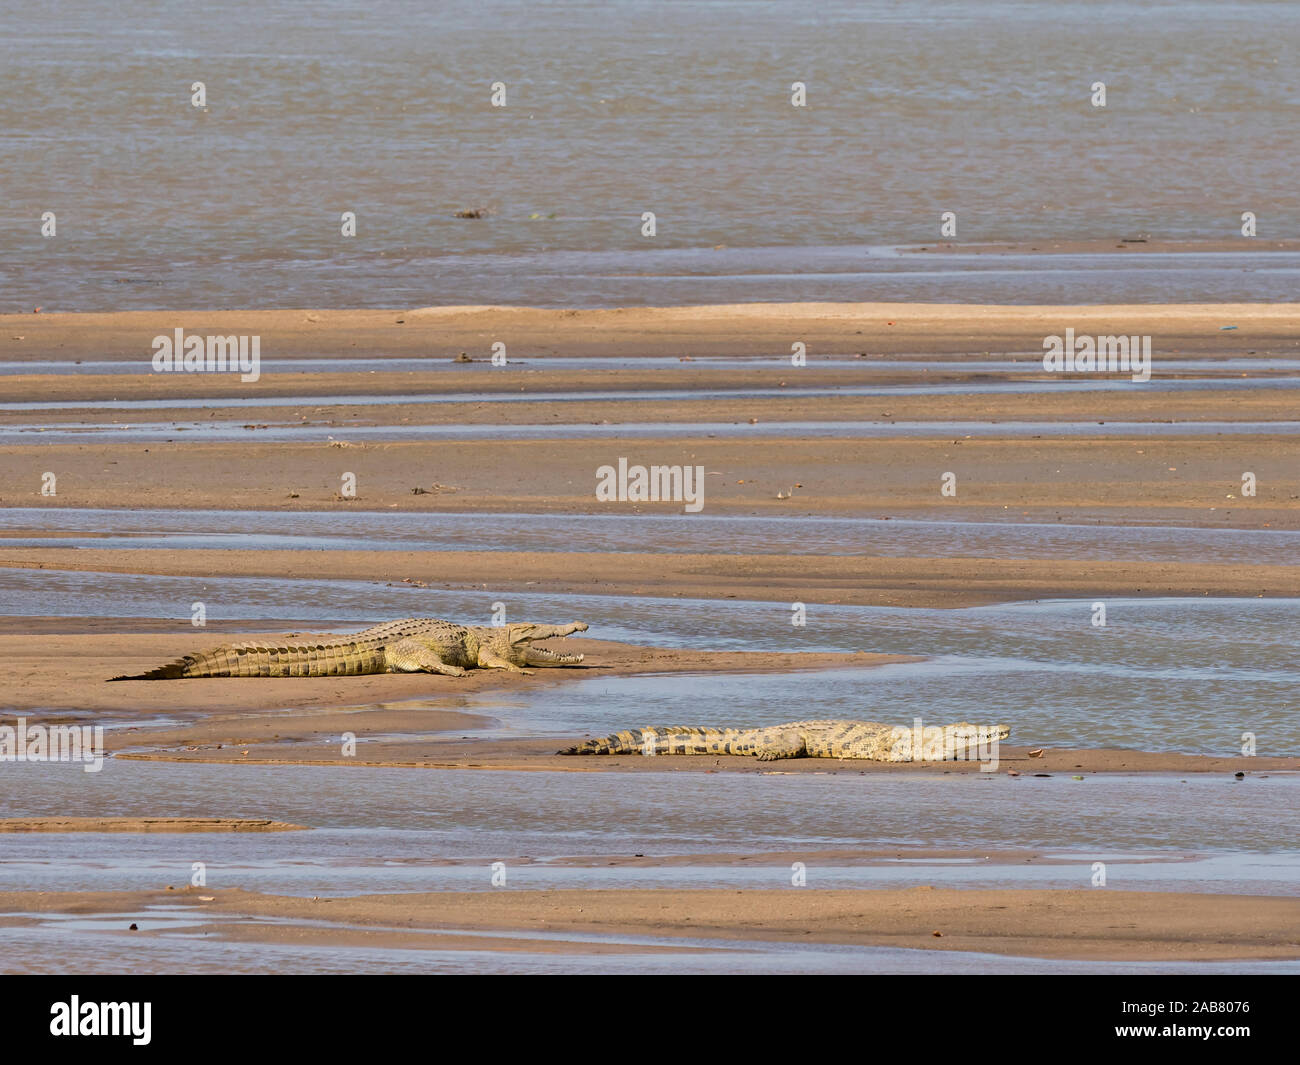 Adult Nile crocodiles (Crocodylus niloticus) basking in the sun in South Luangwa National Park, Zambia, Africa Stock Photo